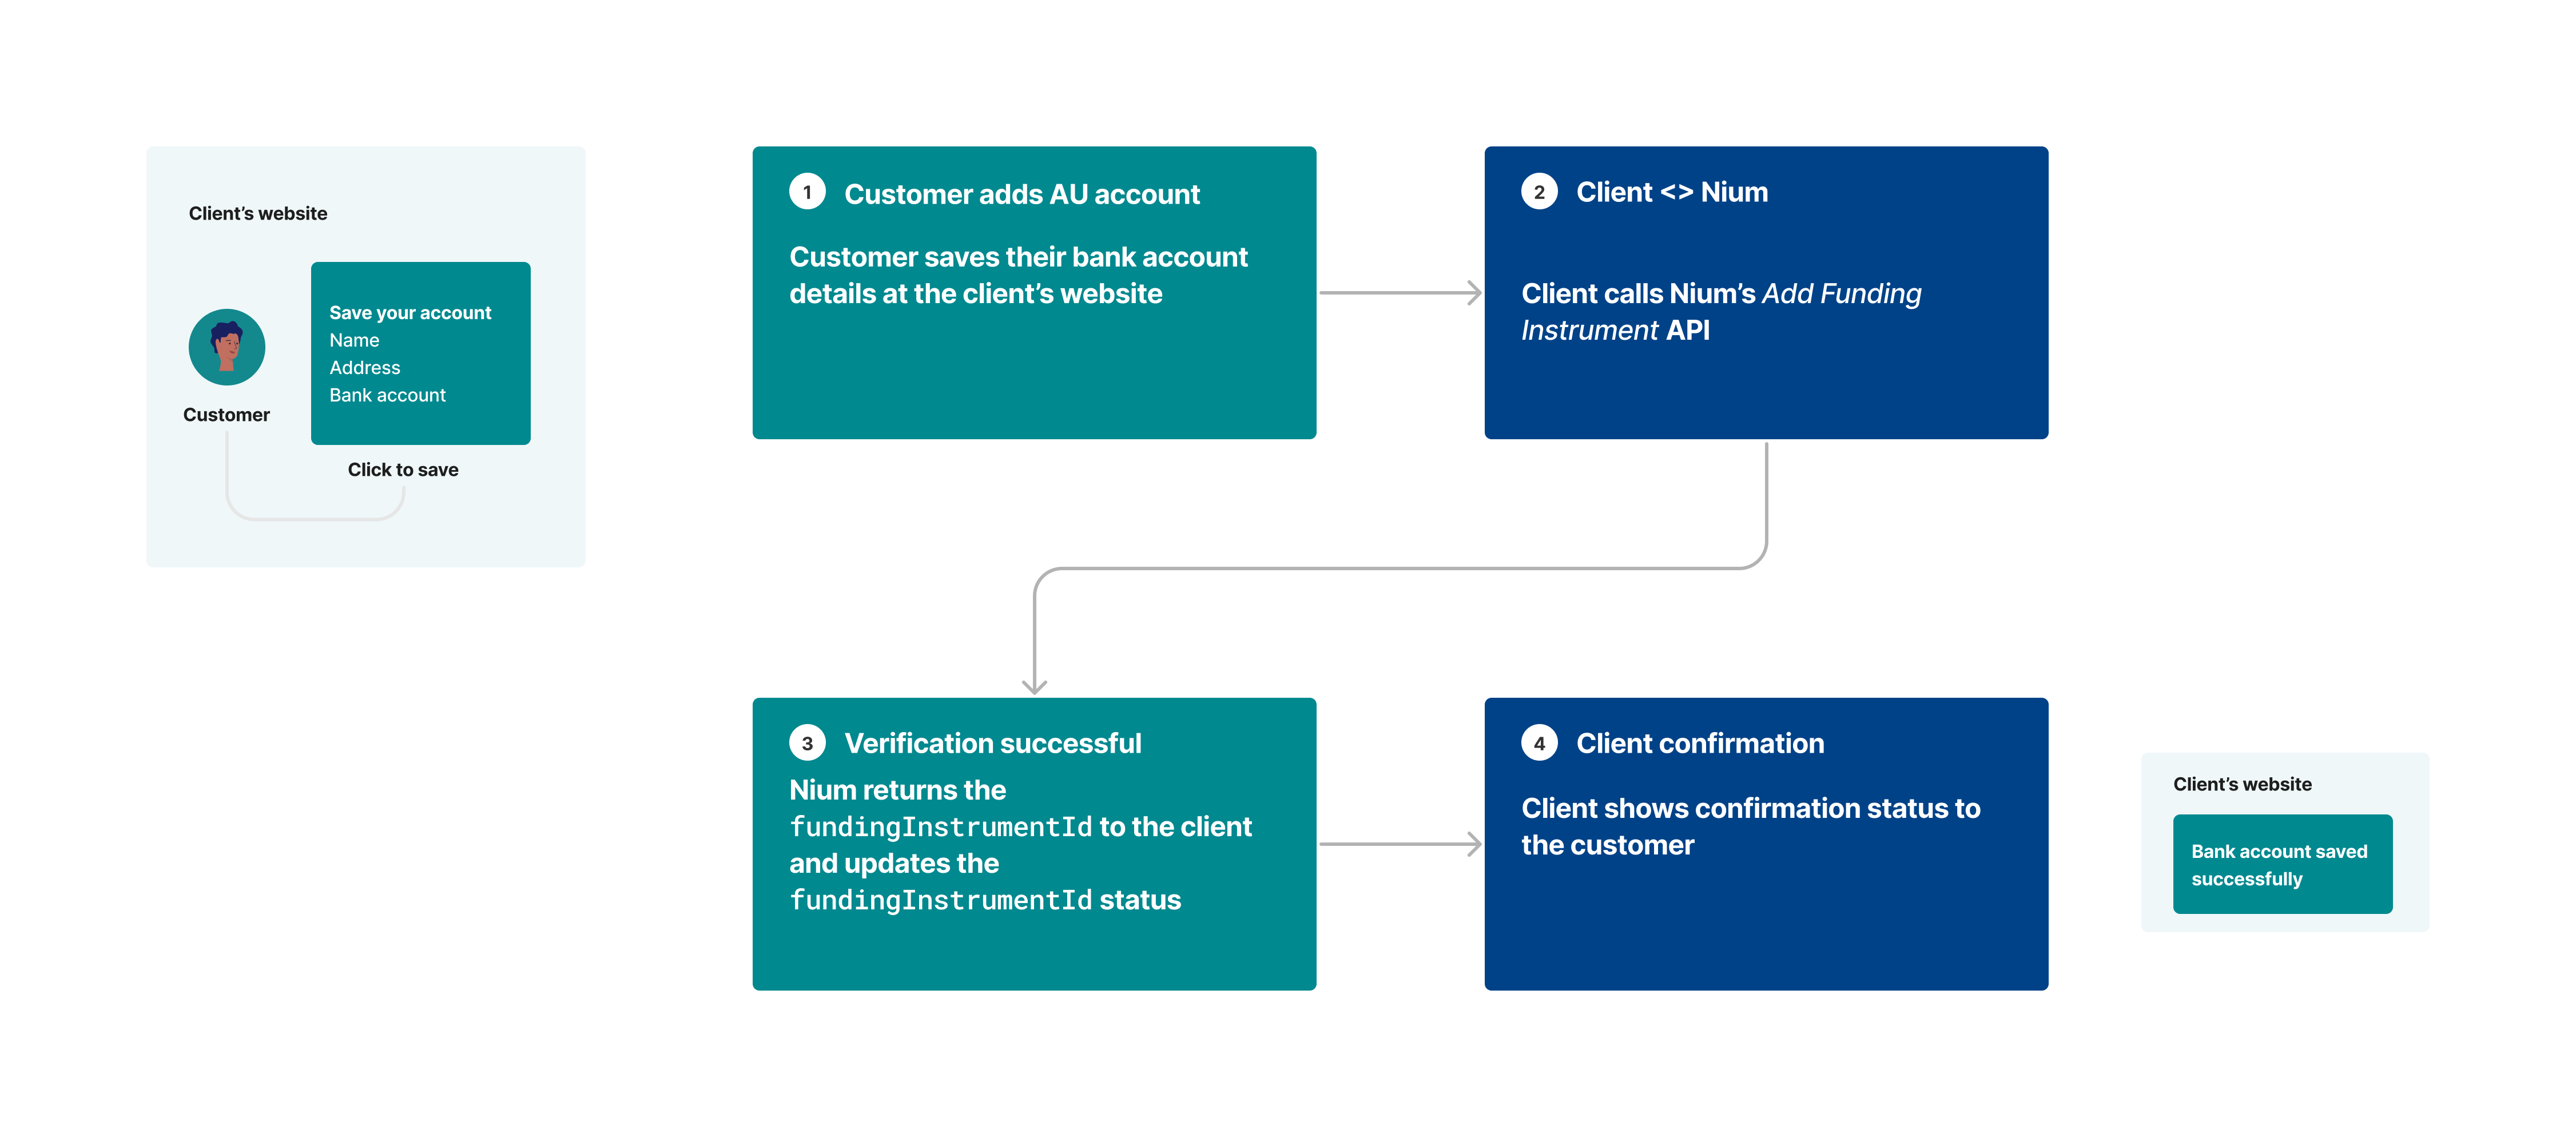 A diagram showing the AU Direct Debit customer experience.